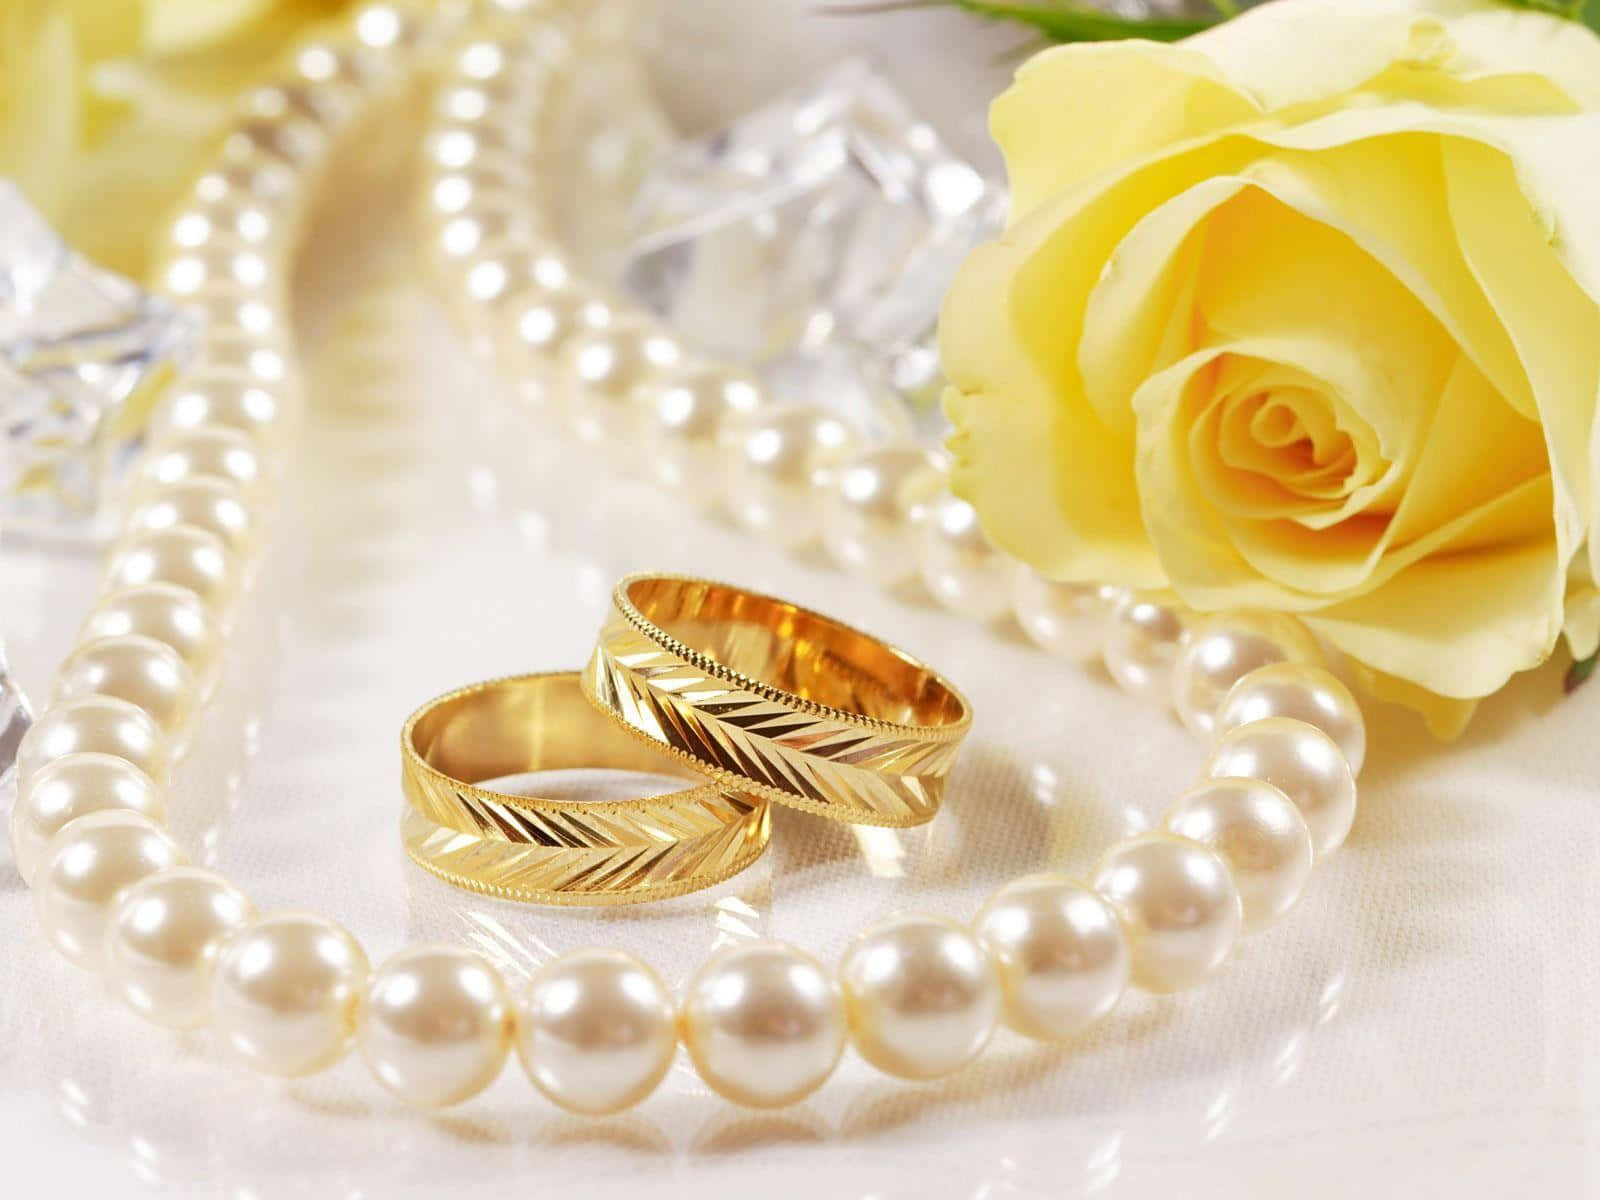 Wedding Rings And Pearls On A White Table